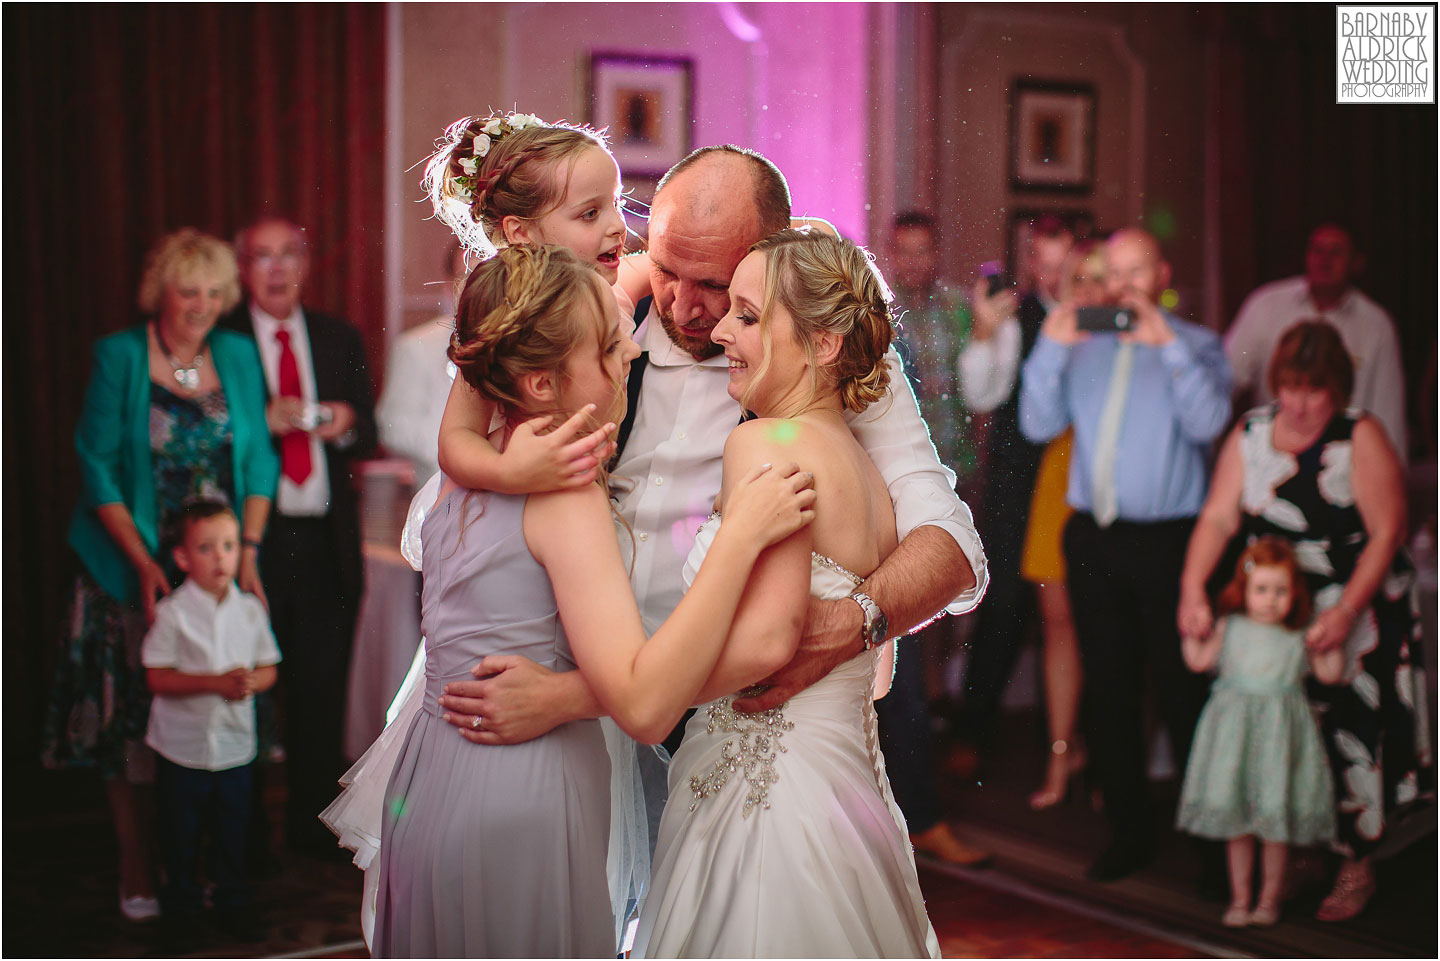 Family wedding photo after first dance at Wood Hall, Amazing Yorkshire Wedding Photos, Best Yorkshire Wedding Photos 2018